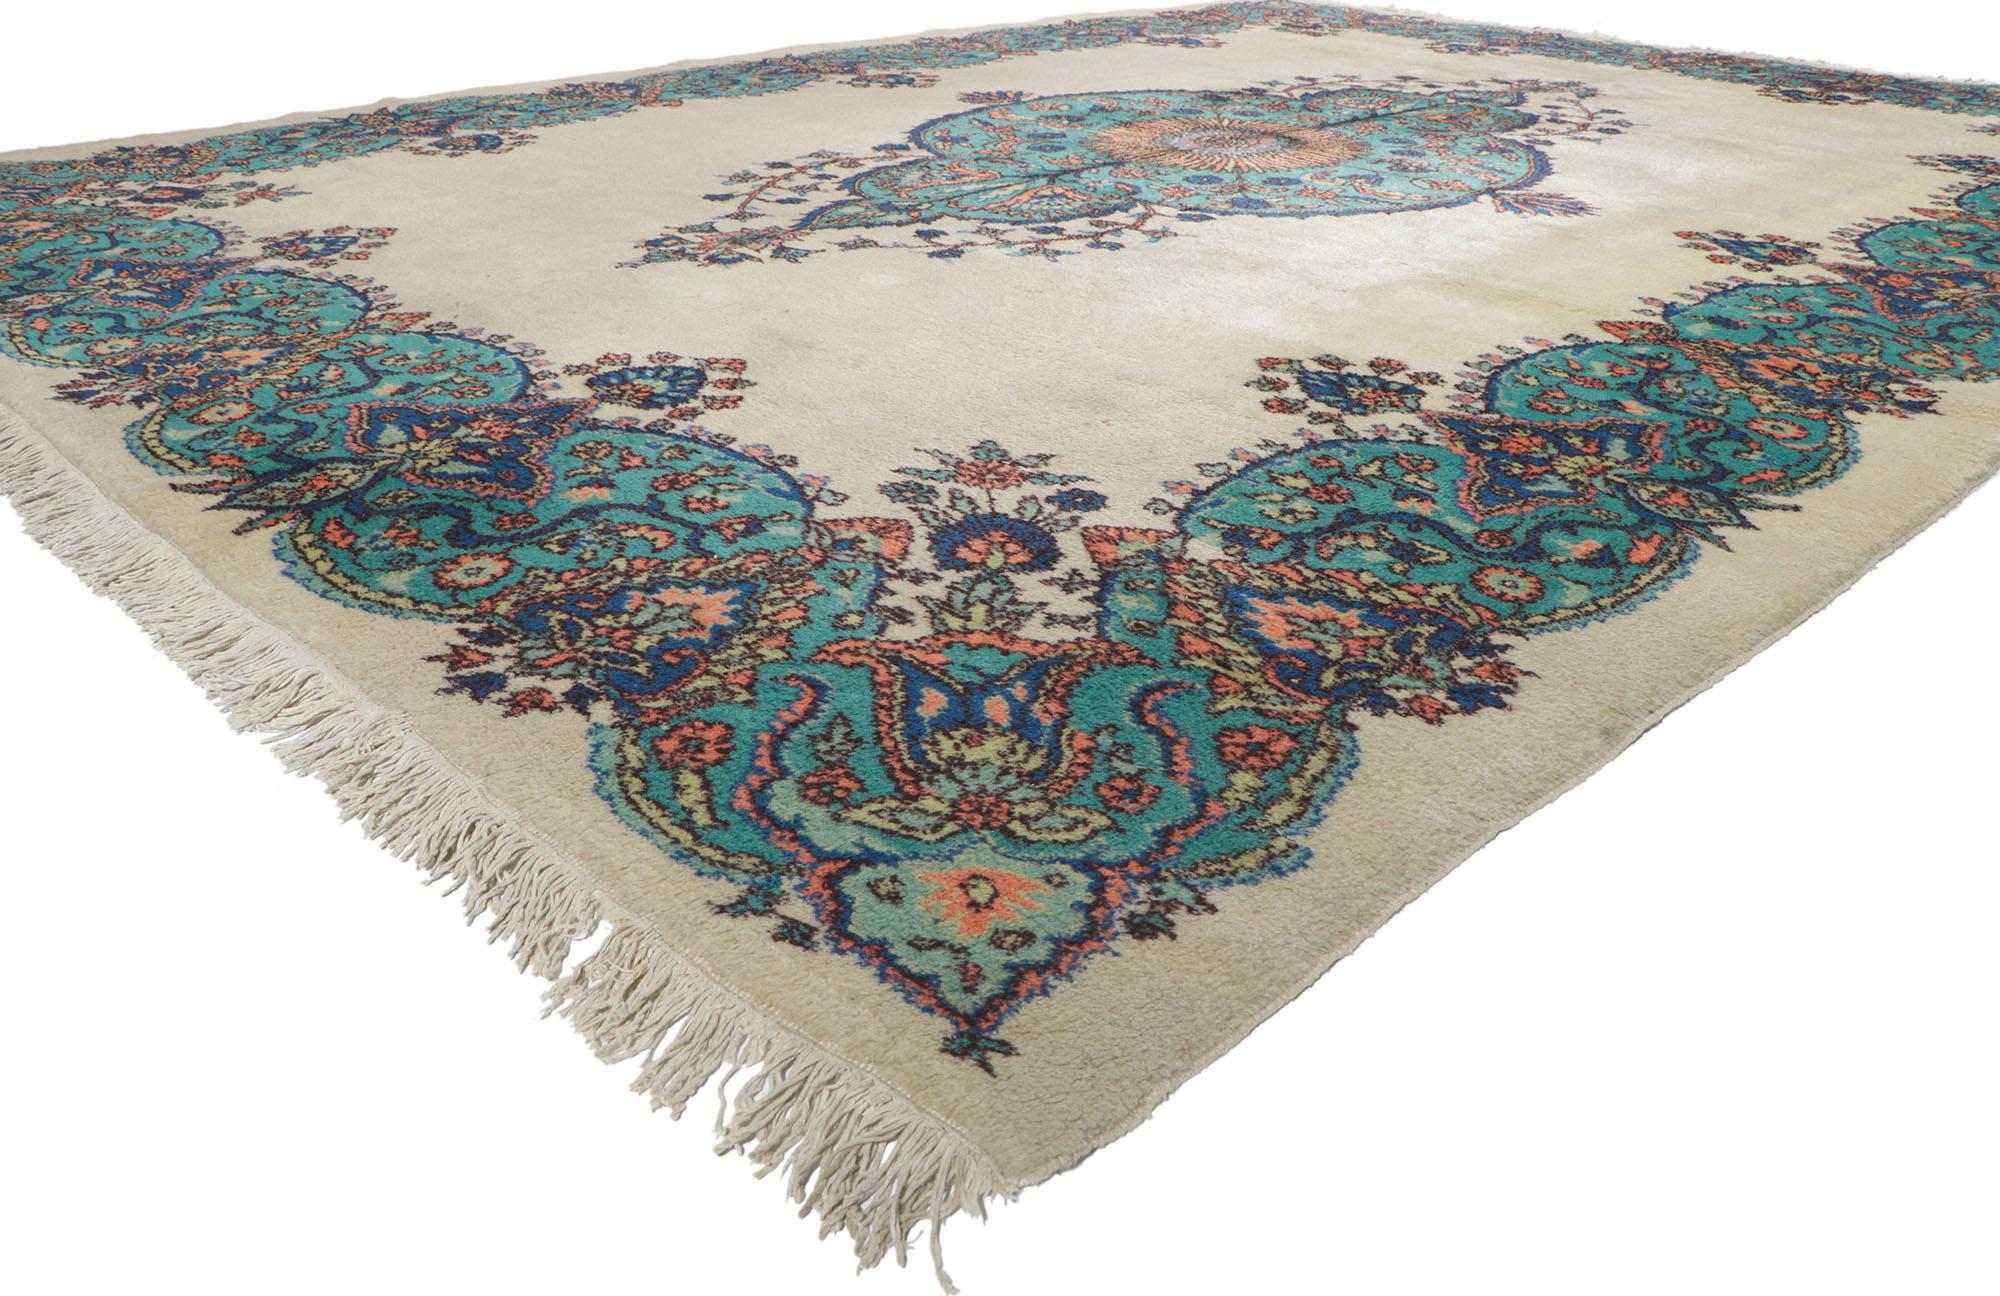 78291 Vintage Turkish Sparta Rug 09'10 x 13'04. With it's timeless elegance and regal charm, this hand knotted wool vintage Turkish Sparta rug beautifully embodies Victorian style. A central medallion anchored with delicate palmette pendants on